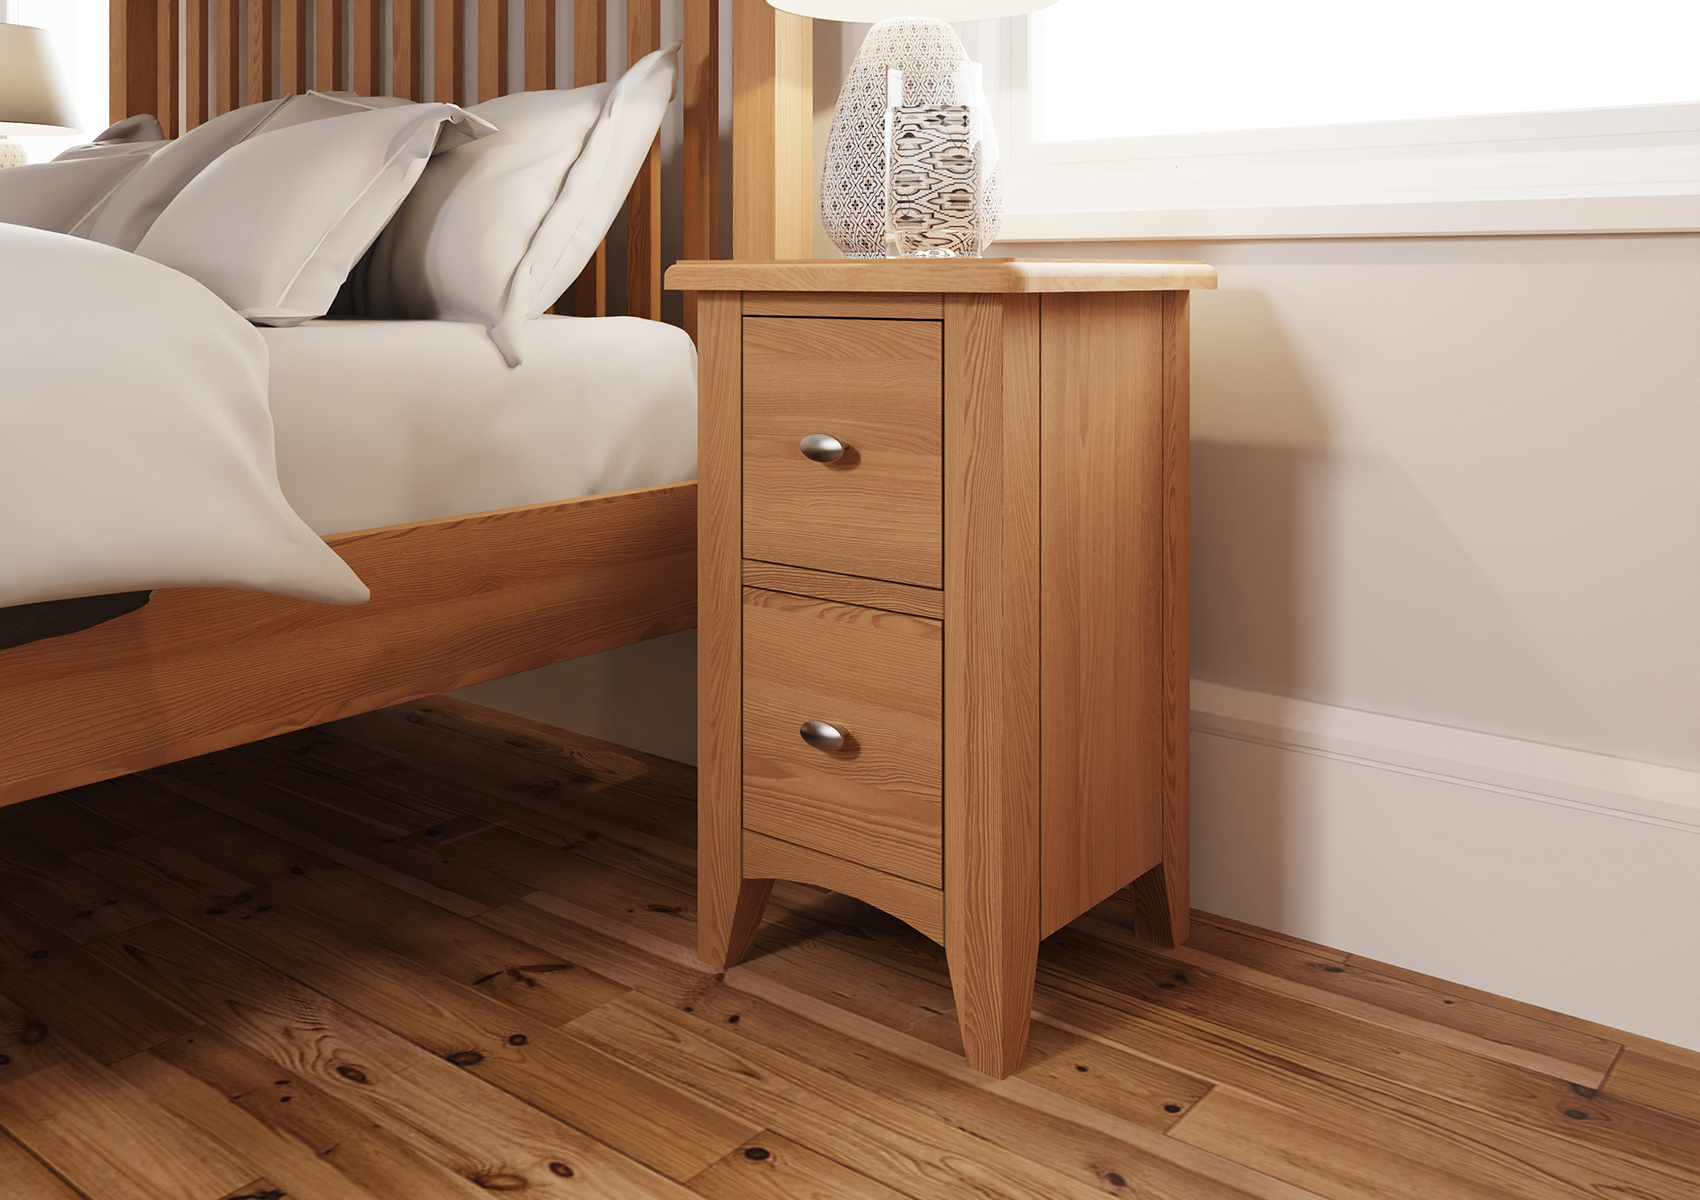 View Gainsborough Light Oak Small Bedside Cabinet Time4Sleep information